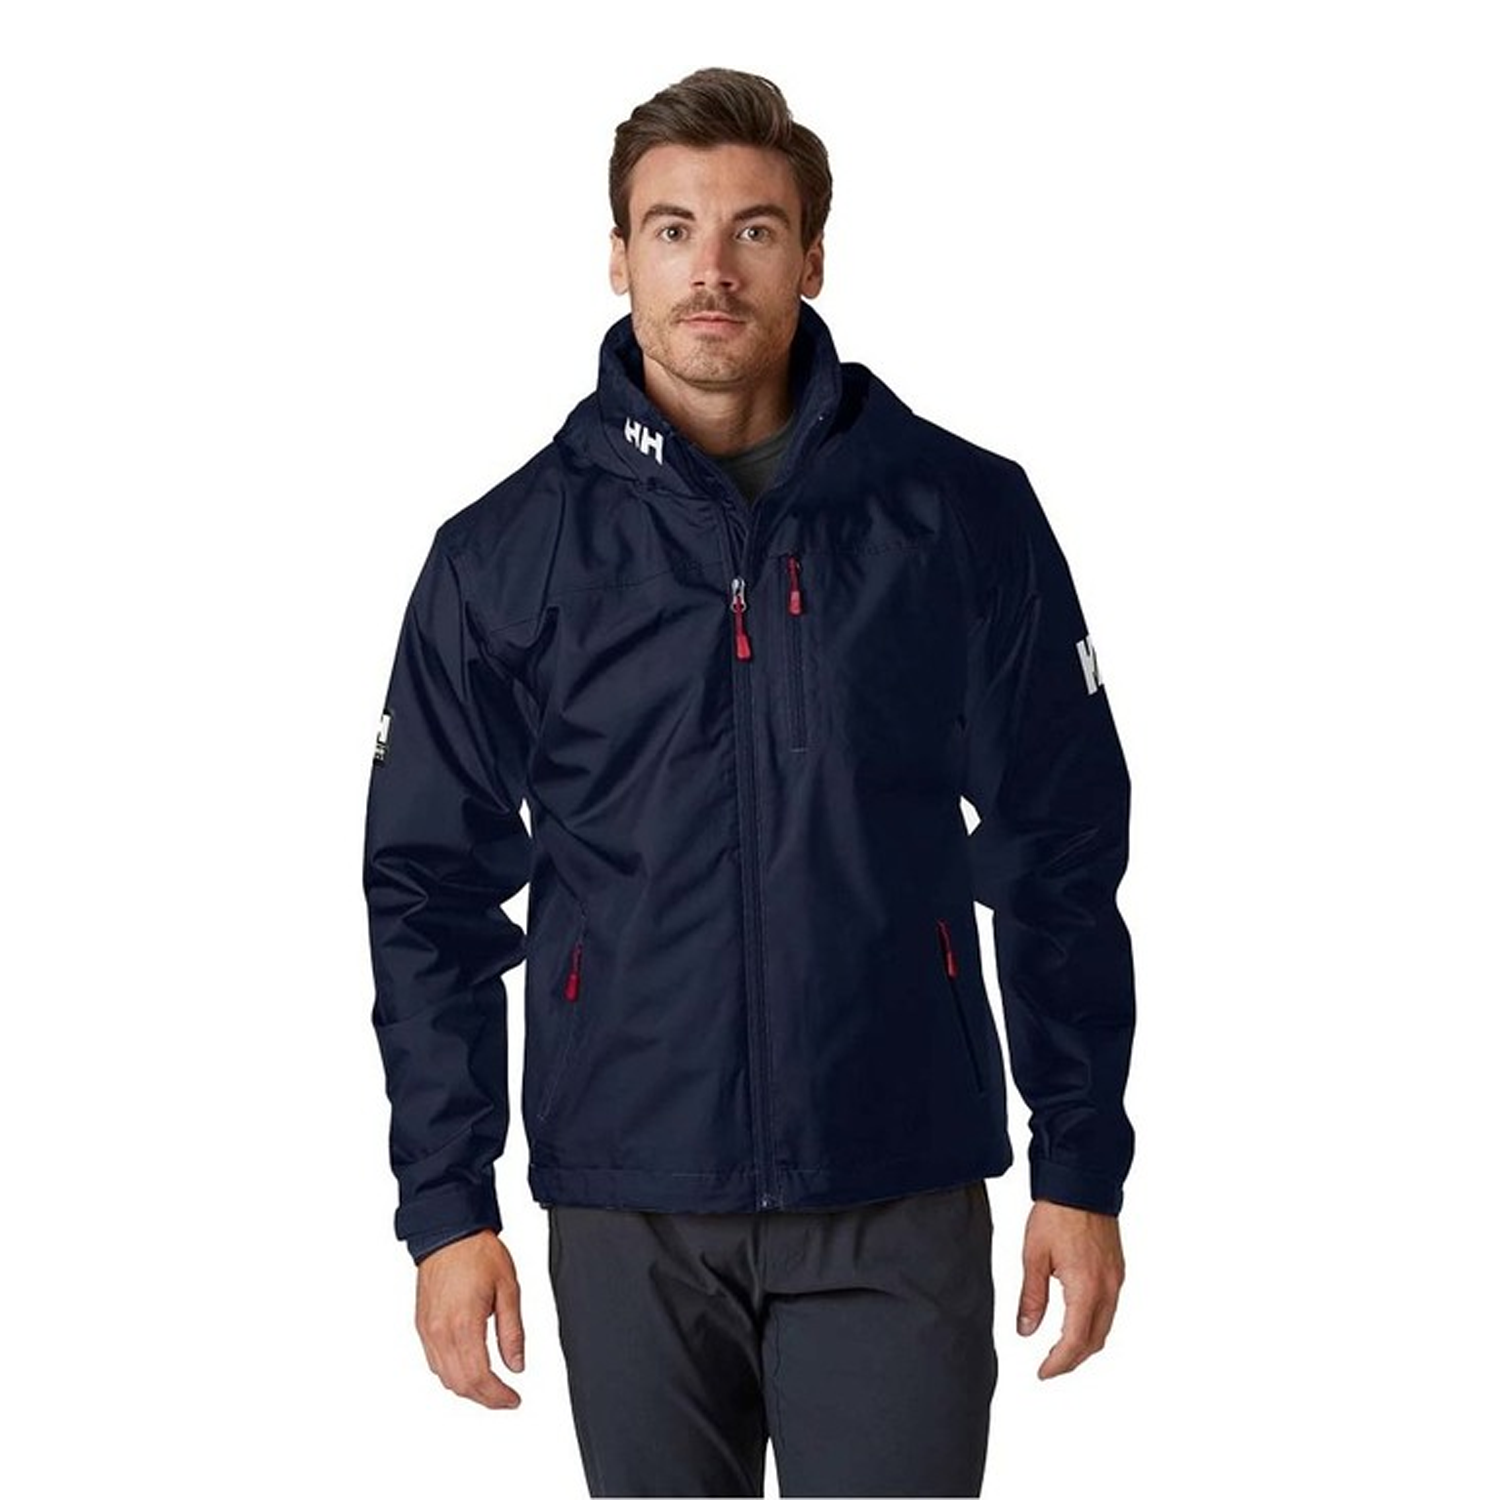 Crew Hooded Mid Layer Jacket Navy